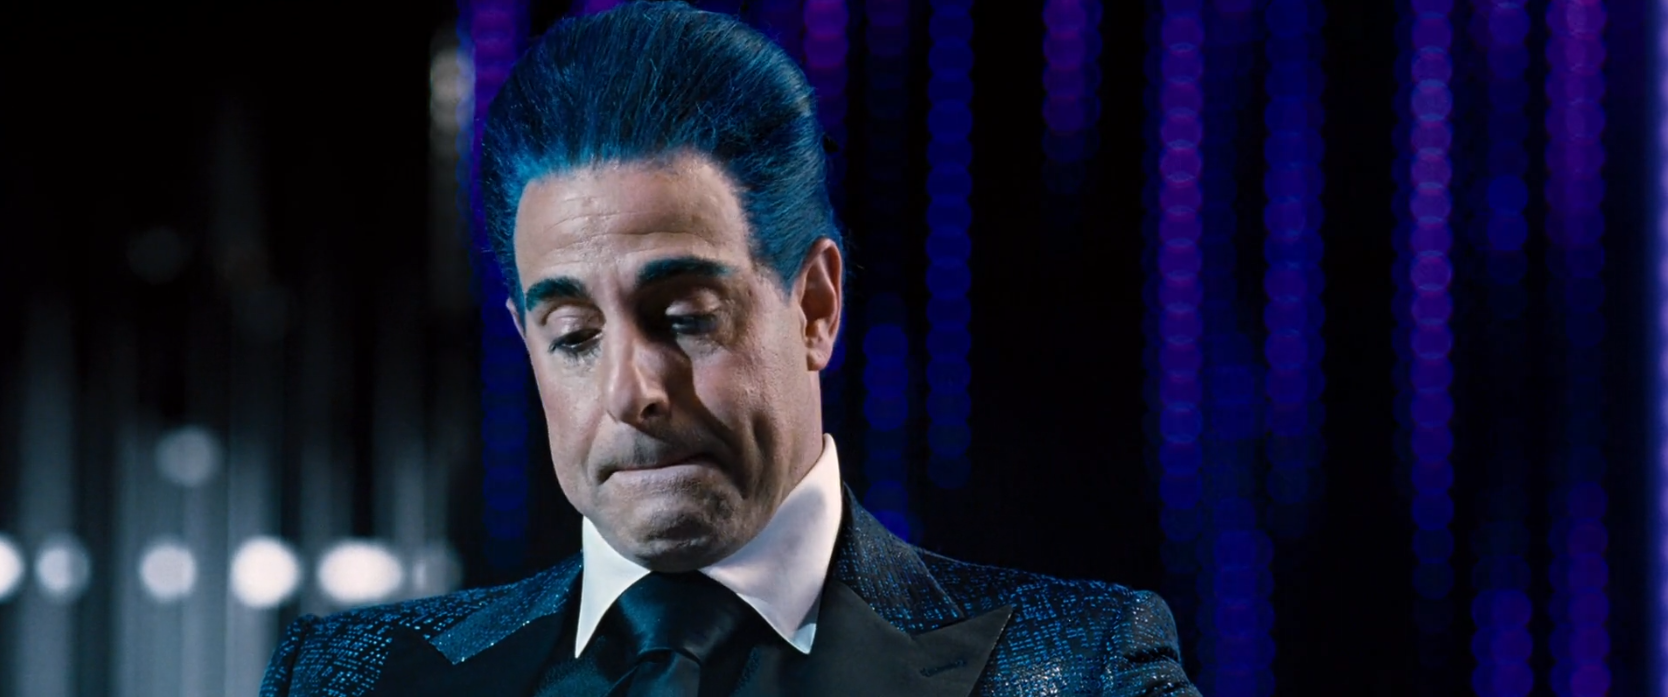 Stanley-Tucci-in-the-hunger-games-with-awesome-blue-hair.png